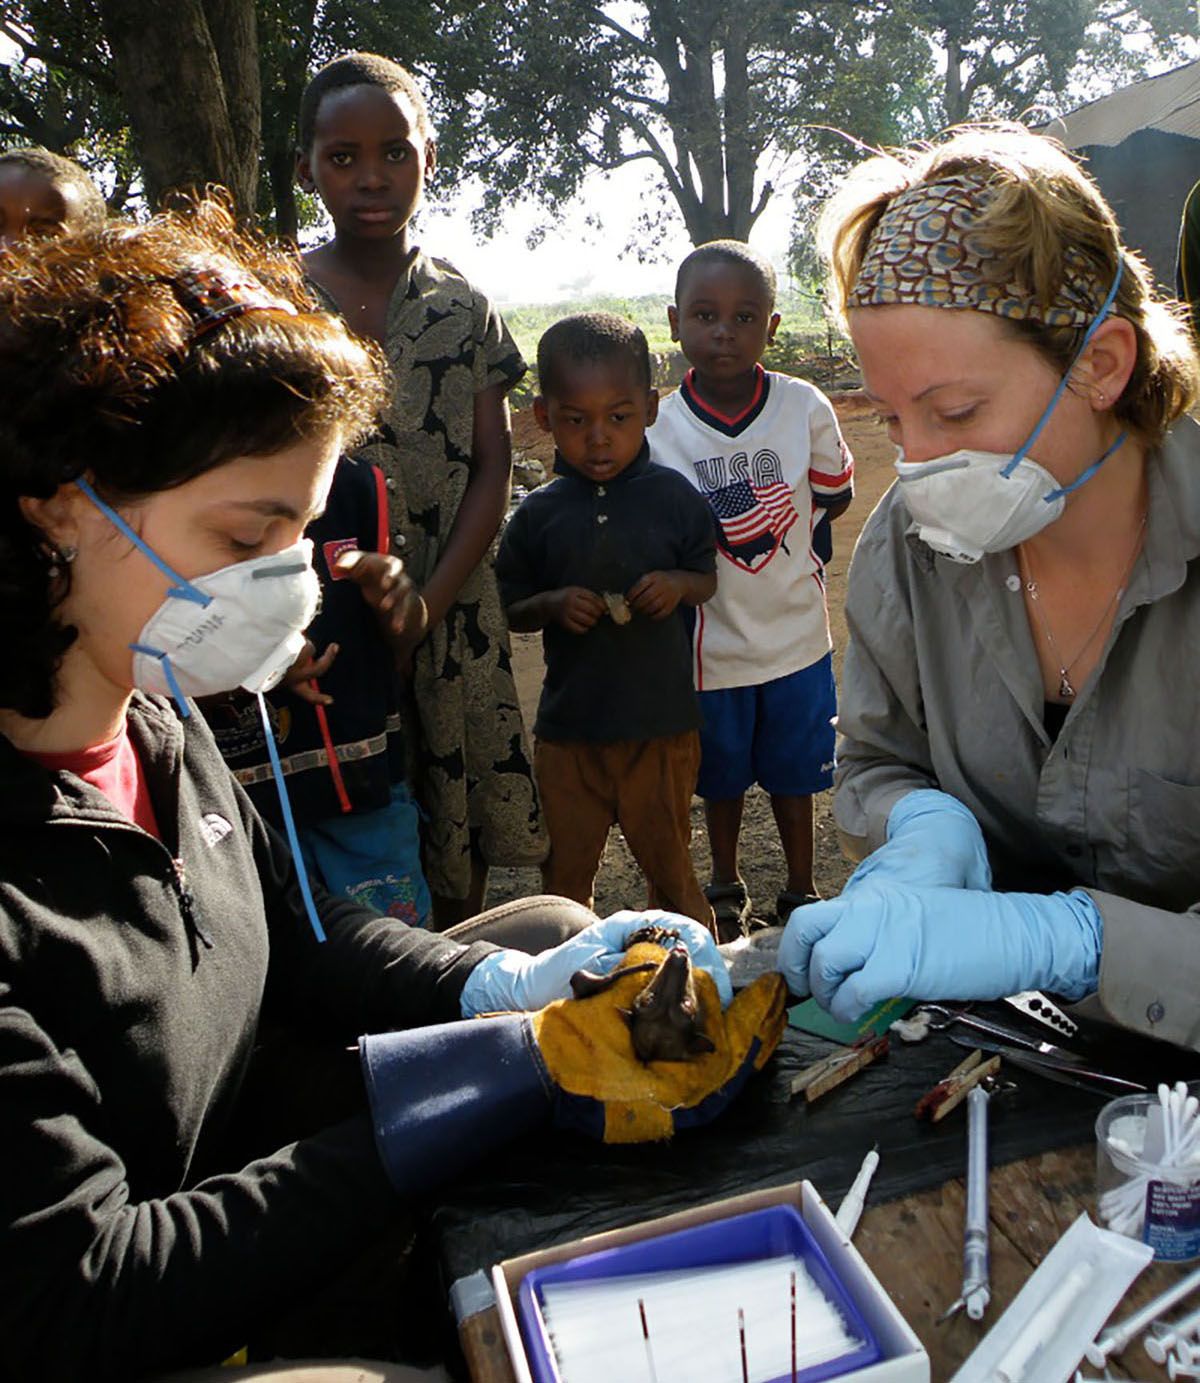 Tiziana Lembo (left) and Alison Peel take samples from bats while children watch in Morogoro, Tanzania. Image by Alexander Torrence. Tanzania.